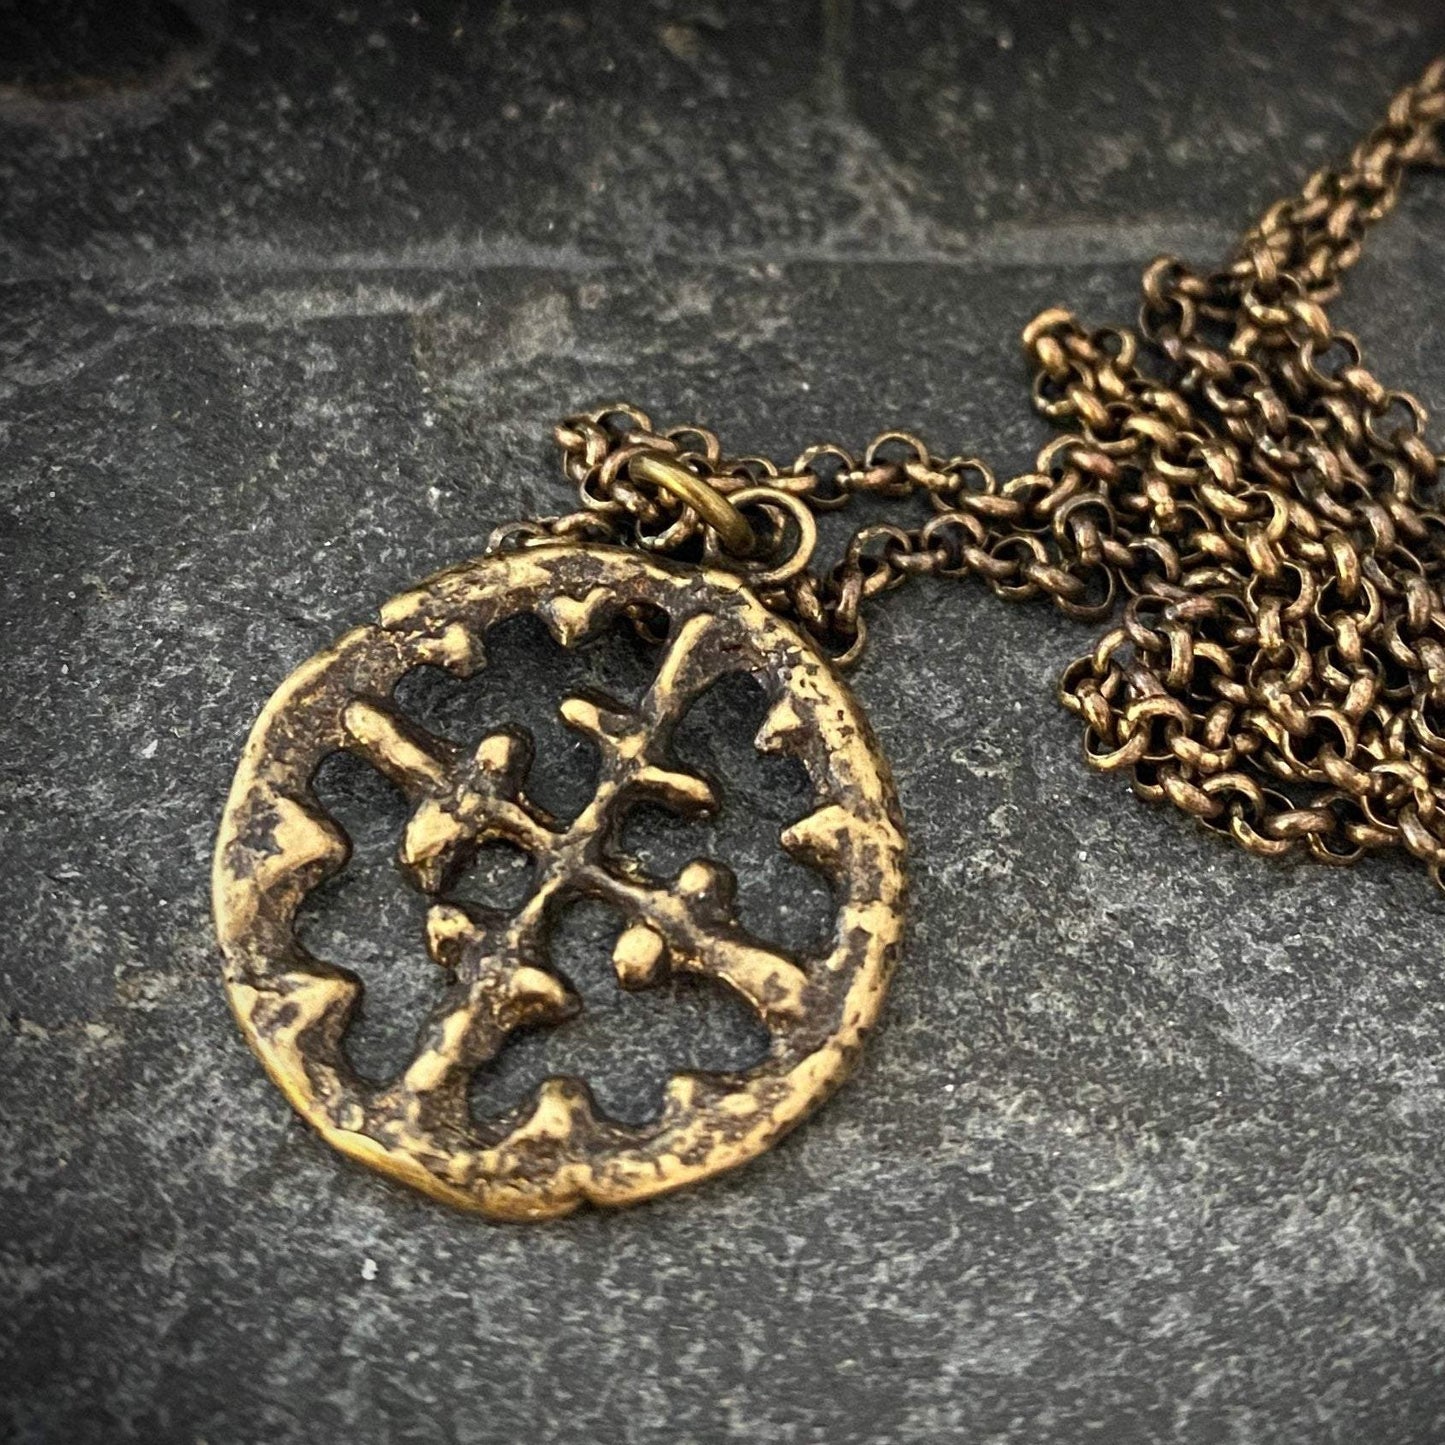 Men's Necklace, Viking Era Cross Produced from Original 10th Century Piece, Antiqued Brass Unisex Jewelry, 20 or 24 Inch Chain, BR-016